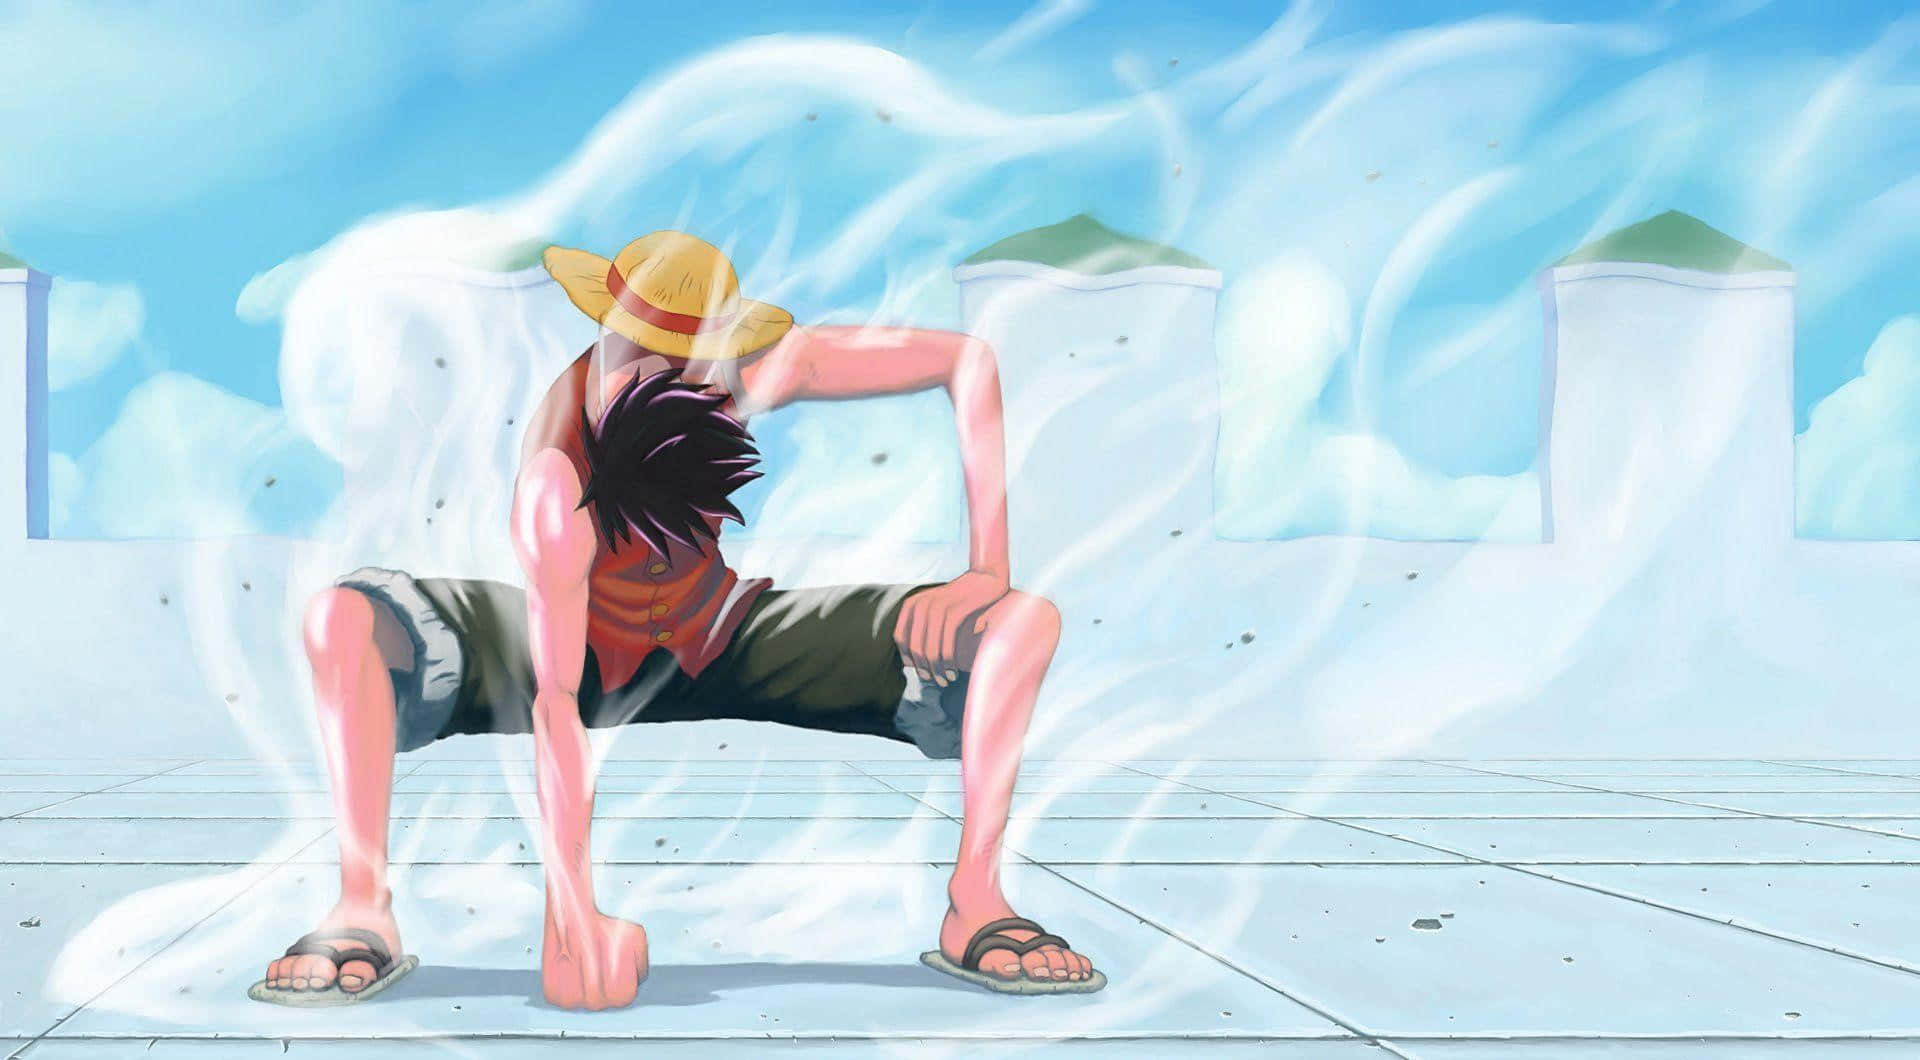 Take A Trip To A World Of Adventure With The Infamous Cool Luffy! Background